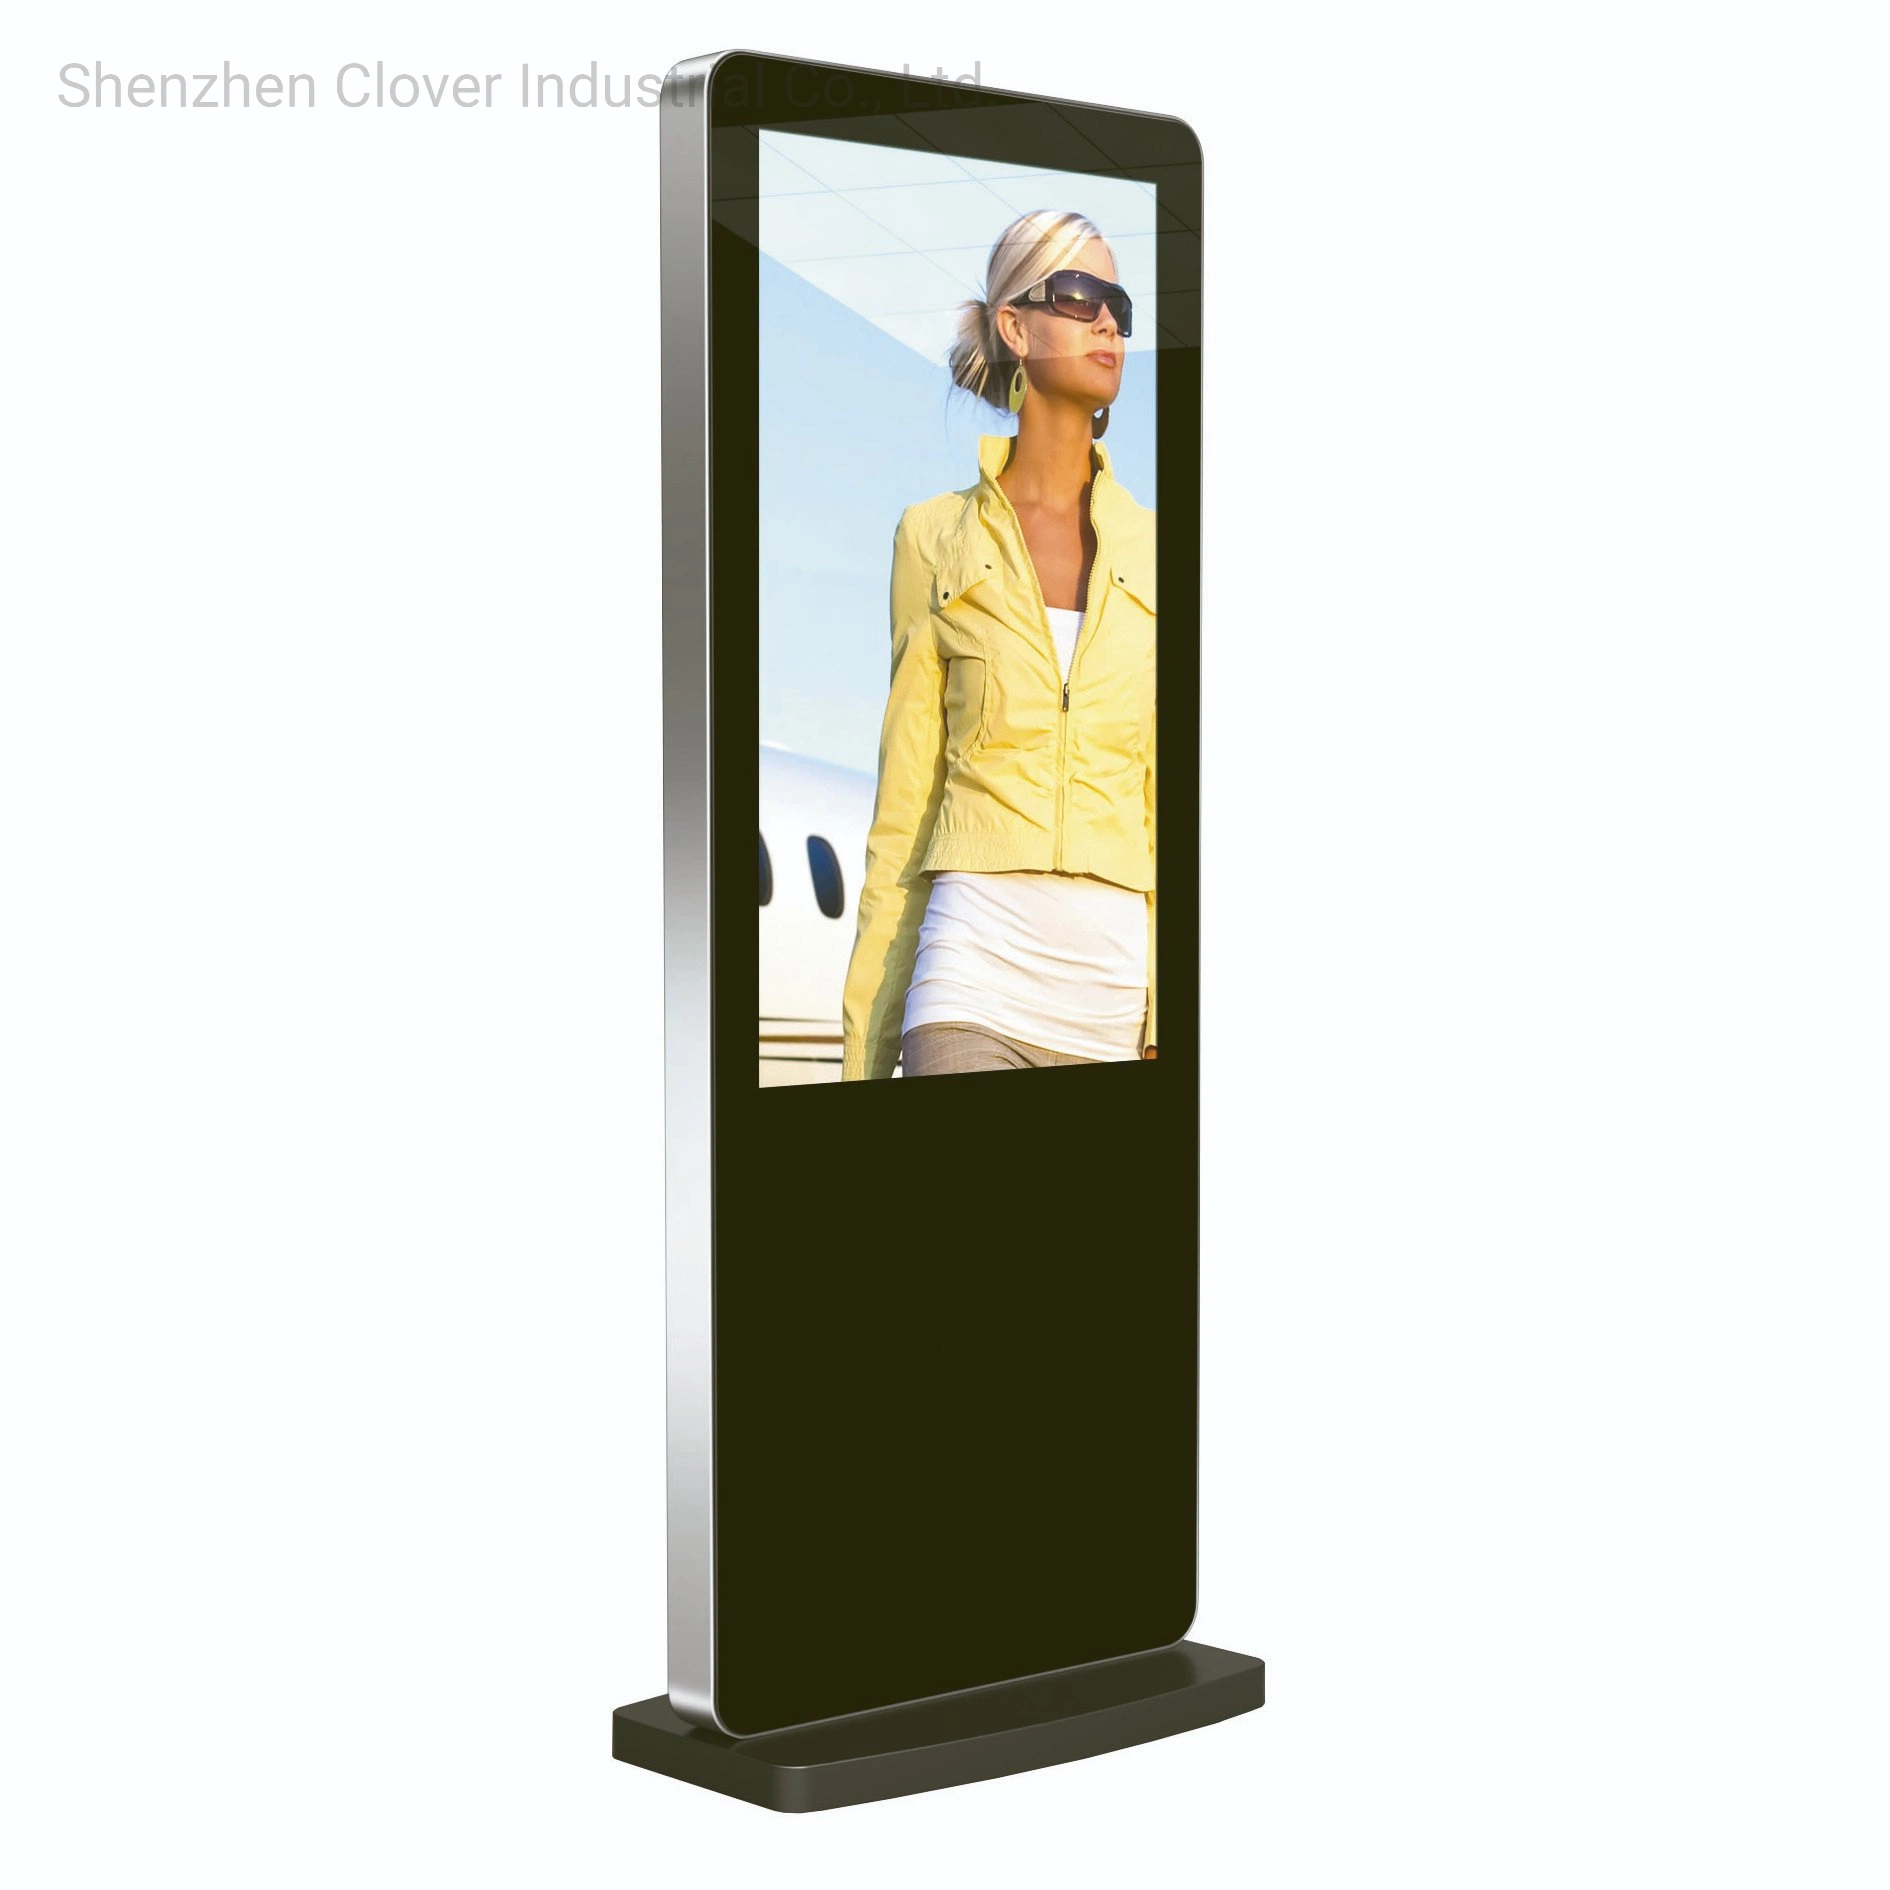 Floor Standing Indoor 43 Inch LCD Advertising Display Touch Interactive Screens Ad Kiosk Stand Alone Digital Advertising Machine